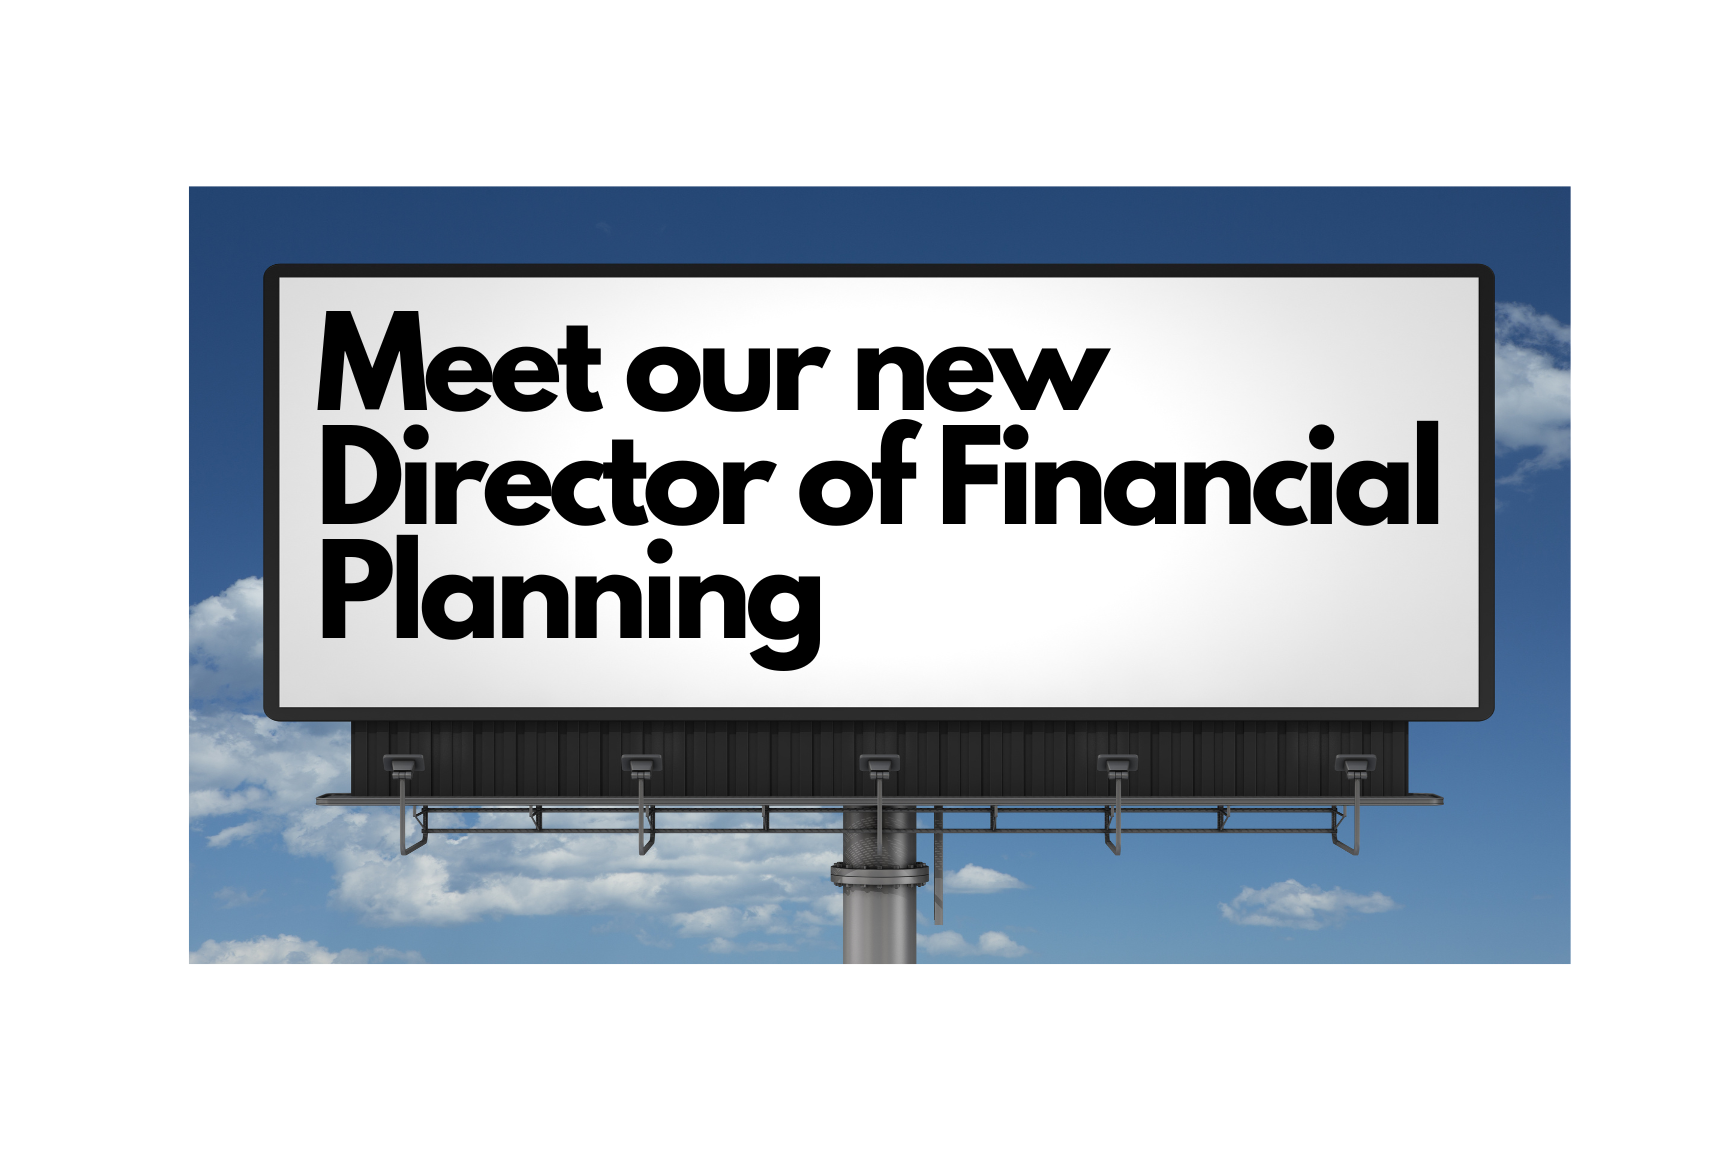 Meet our new Director of Financial Planning